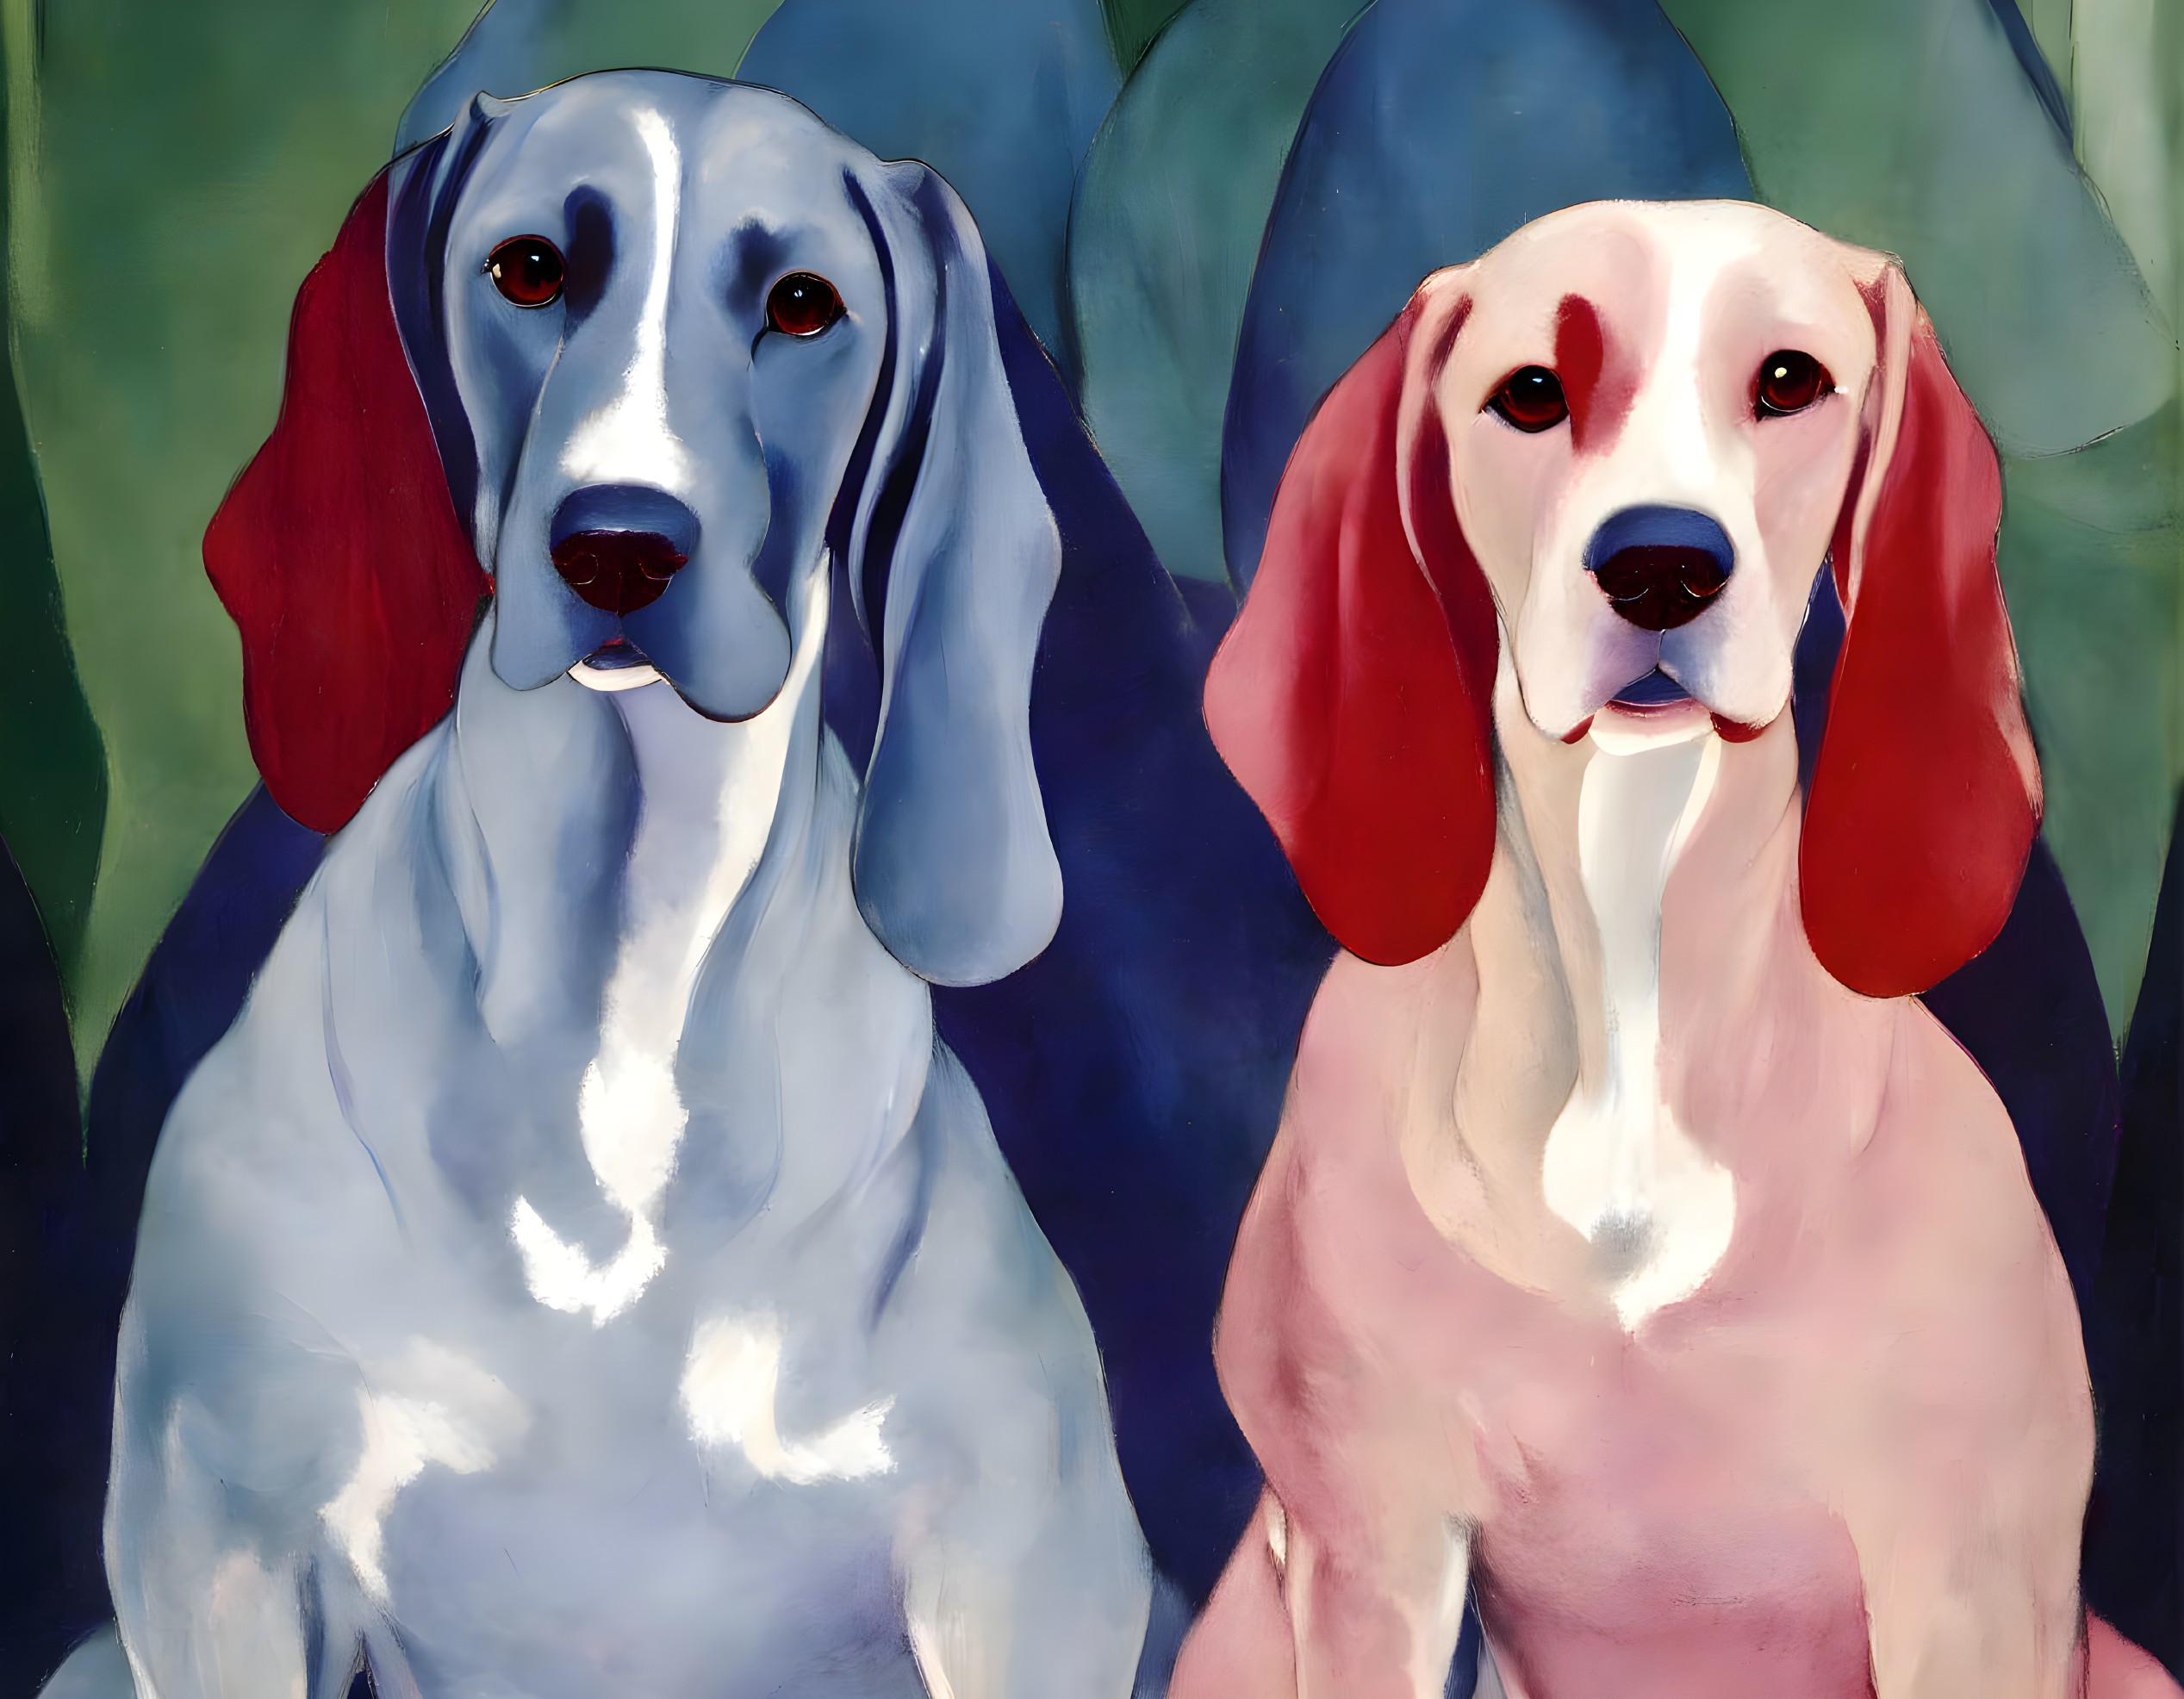 Colorful Stylized Dog Paintings: Blue & White Dogs with Elongated Ears on